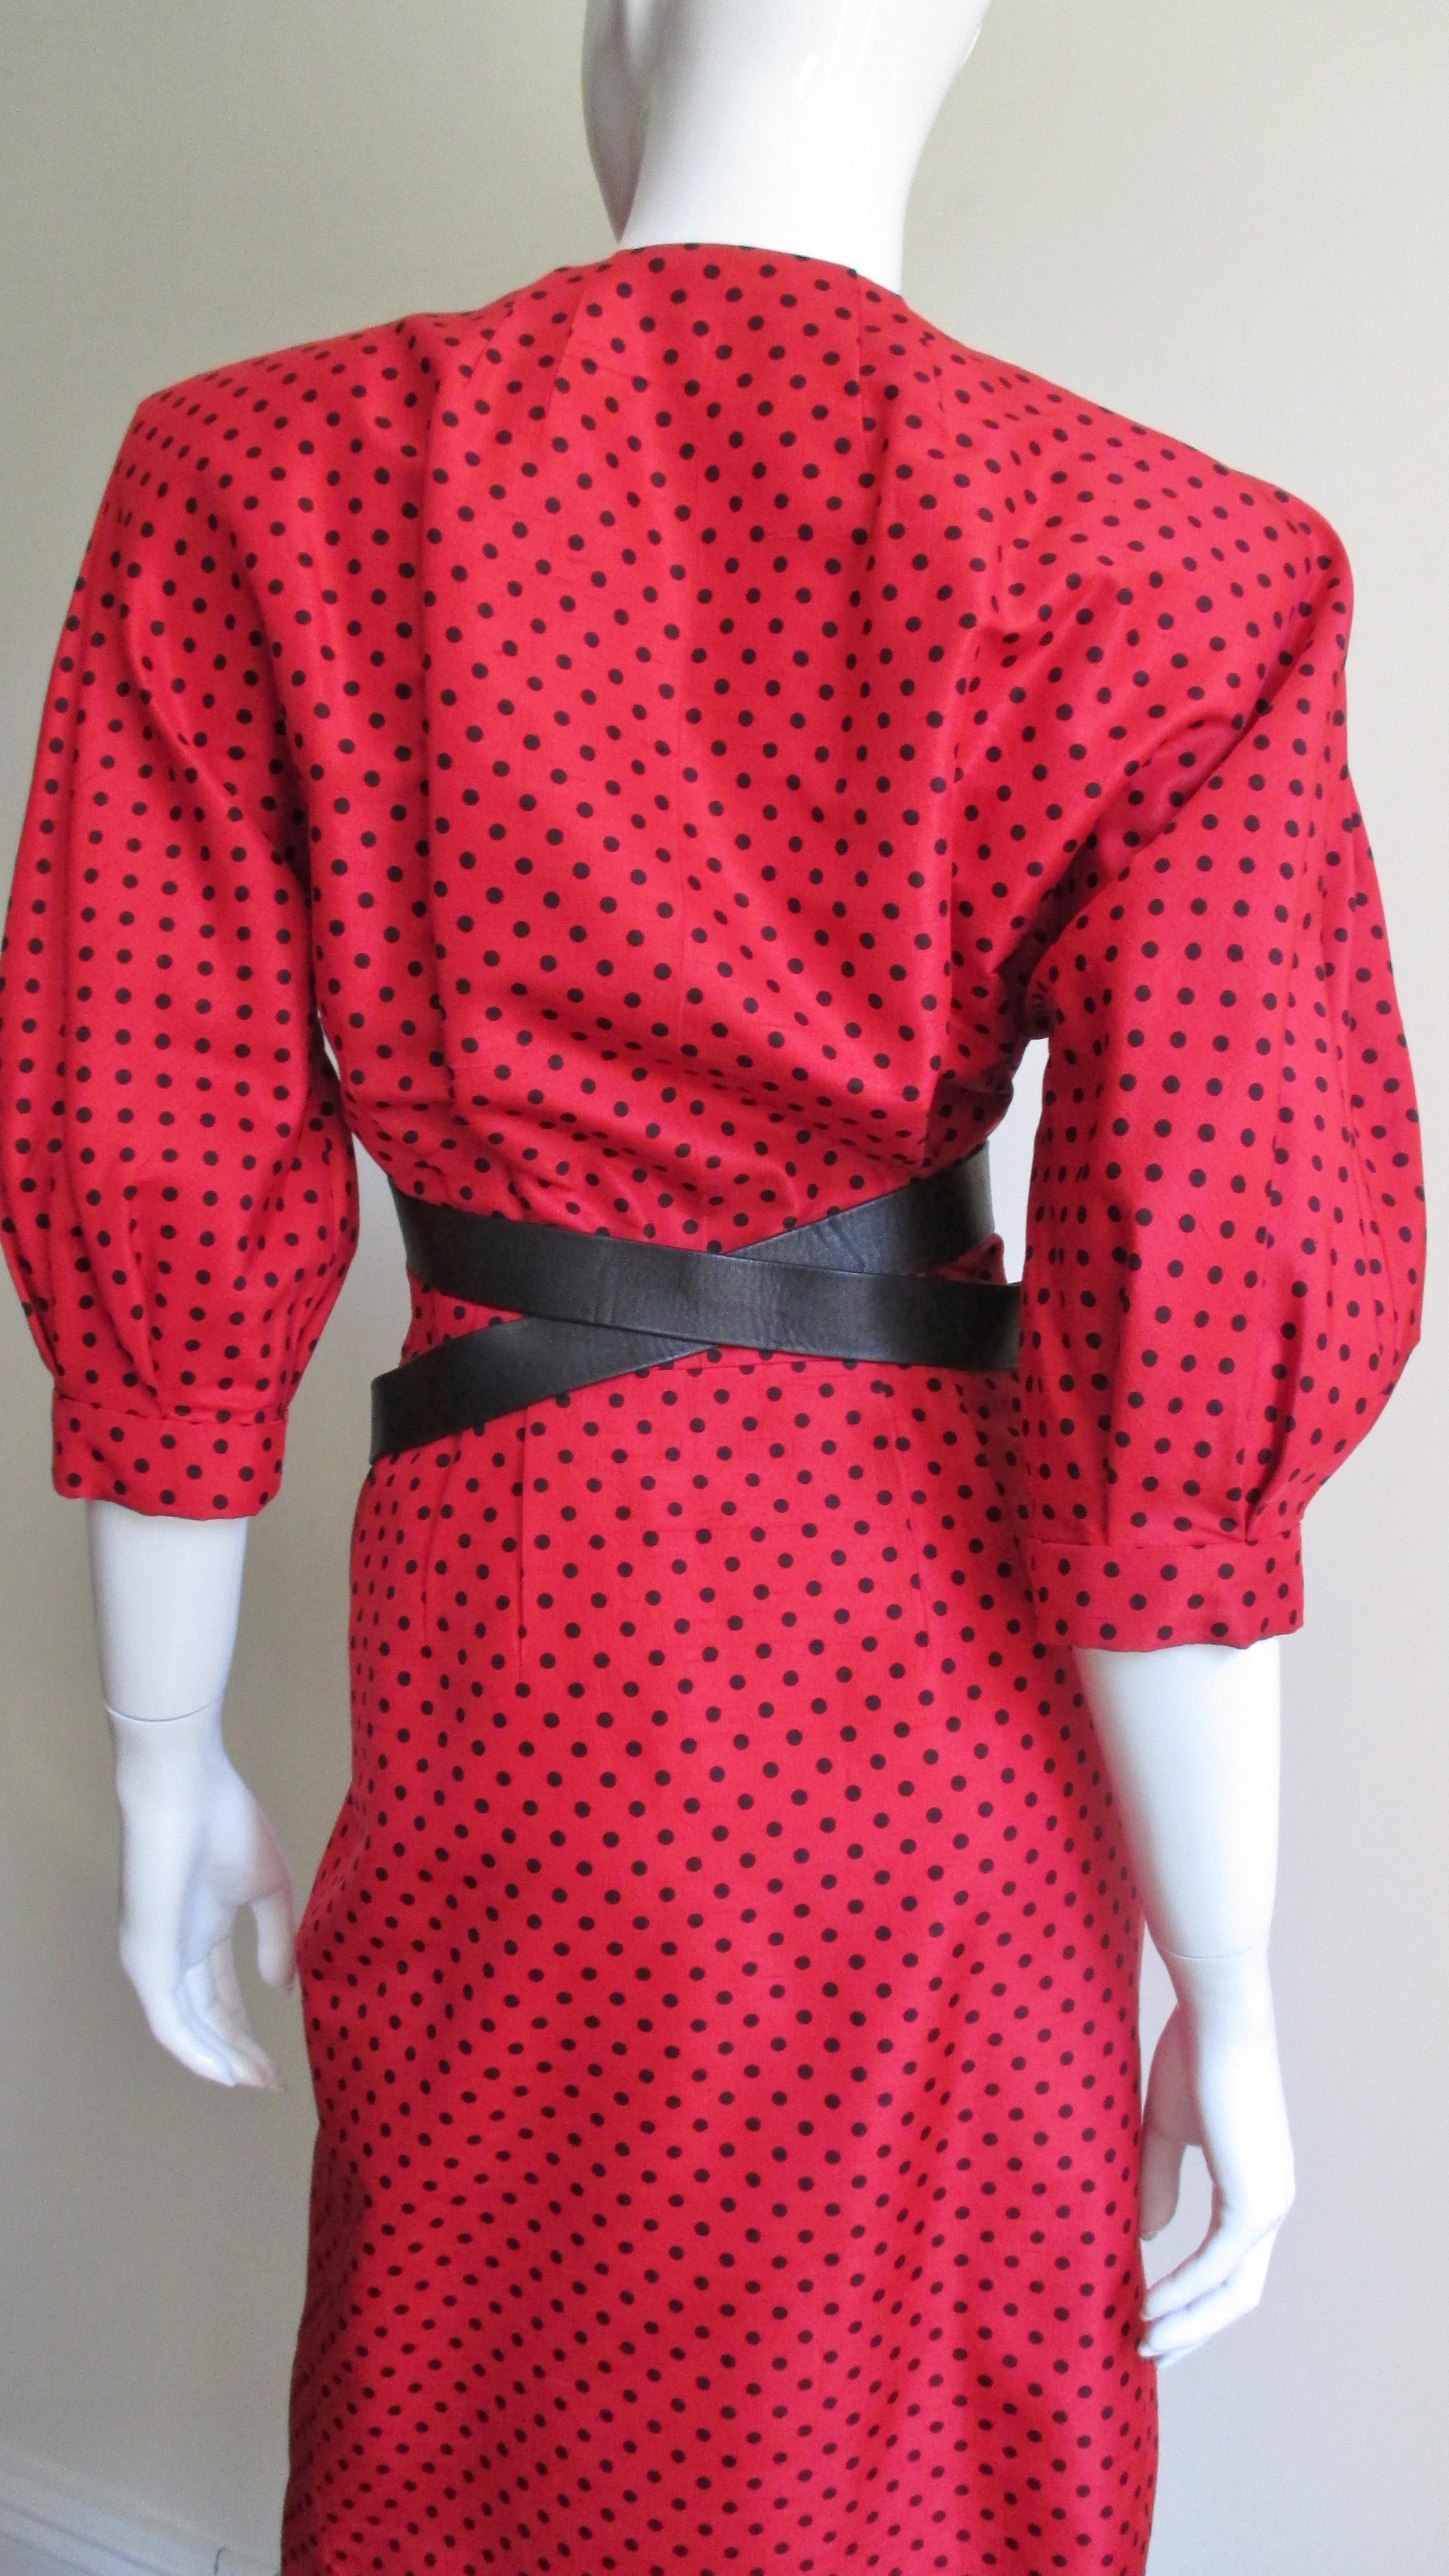 Jacqueline de Ribes Silk Dress With Leather Straps 1980s For Sale 4